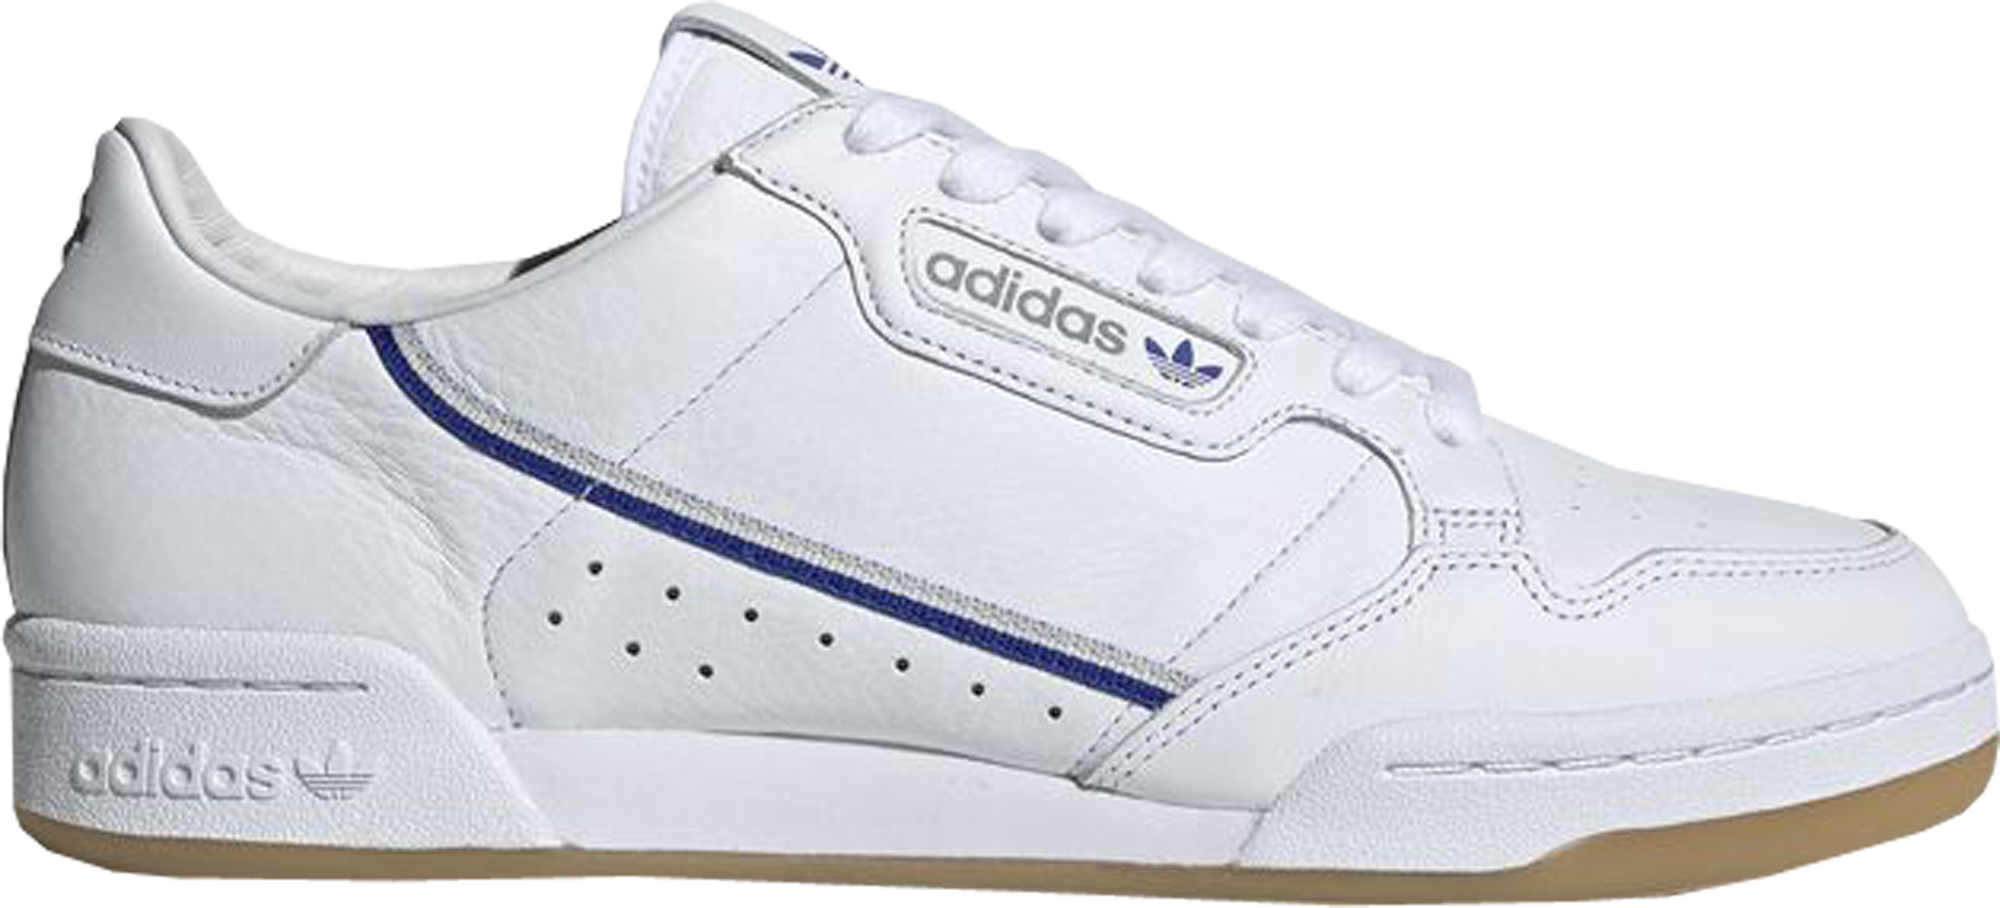 adidas continental 80 blue and white